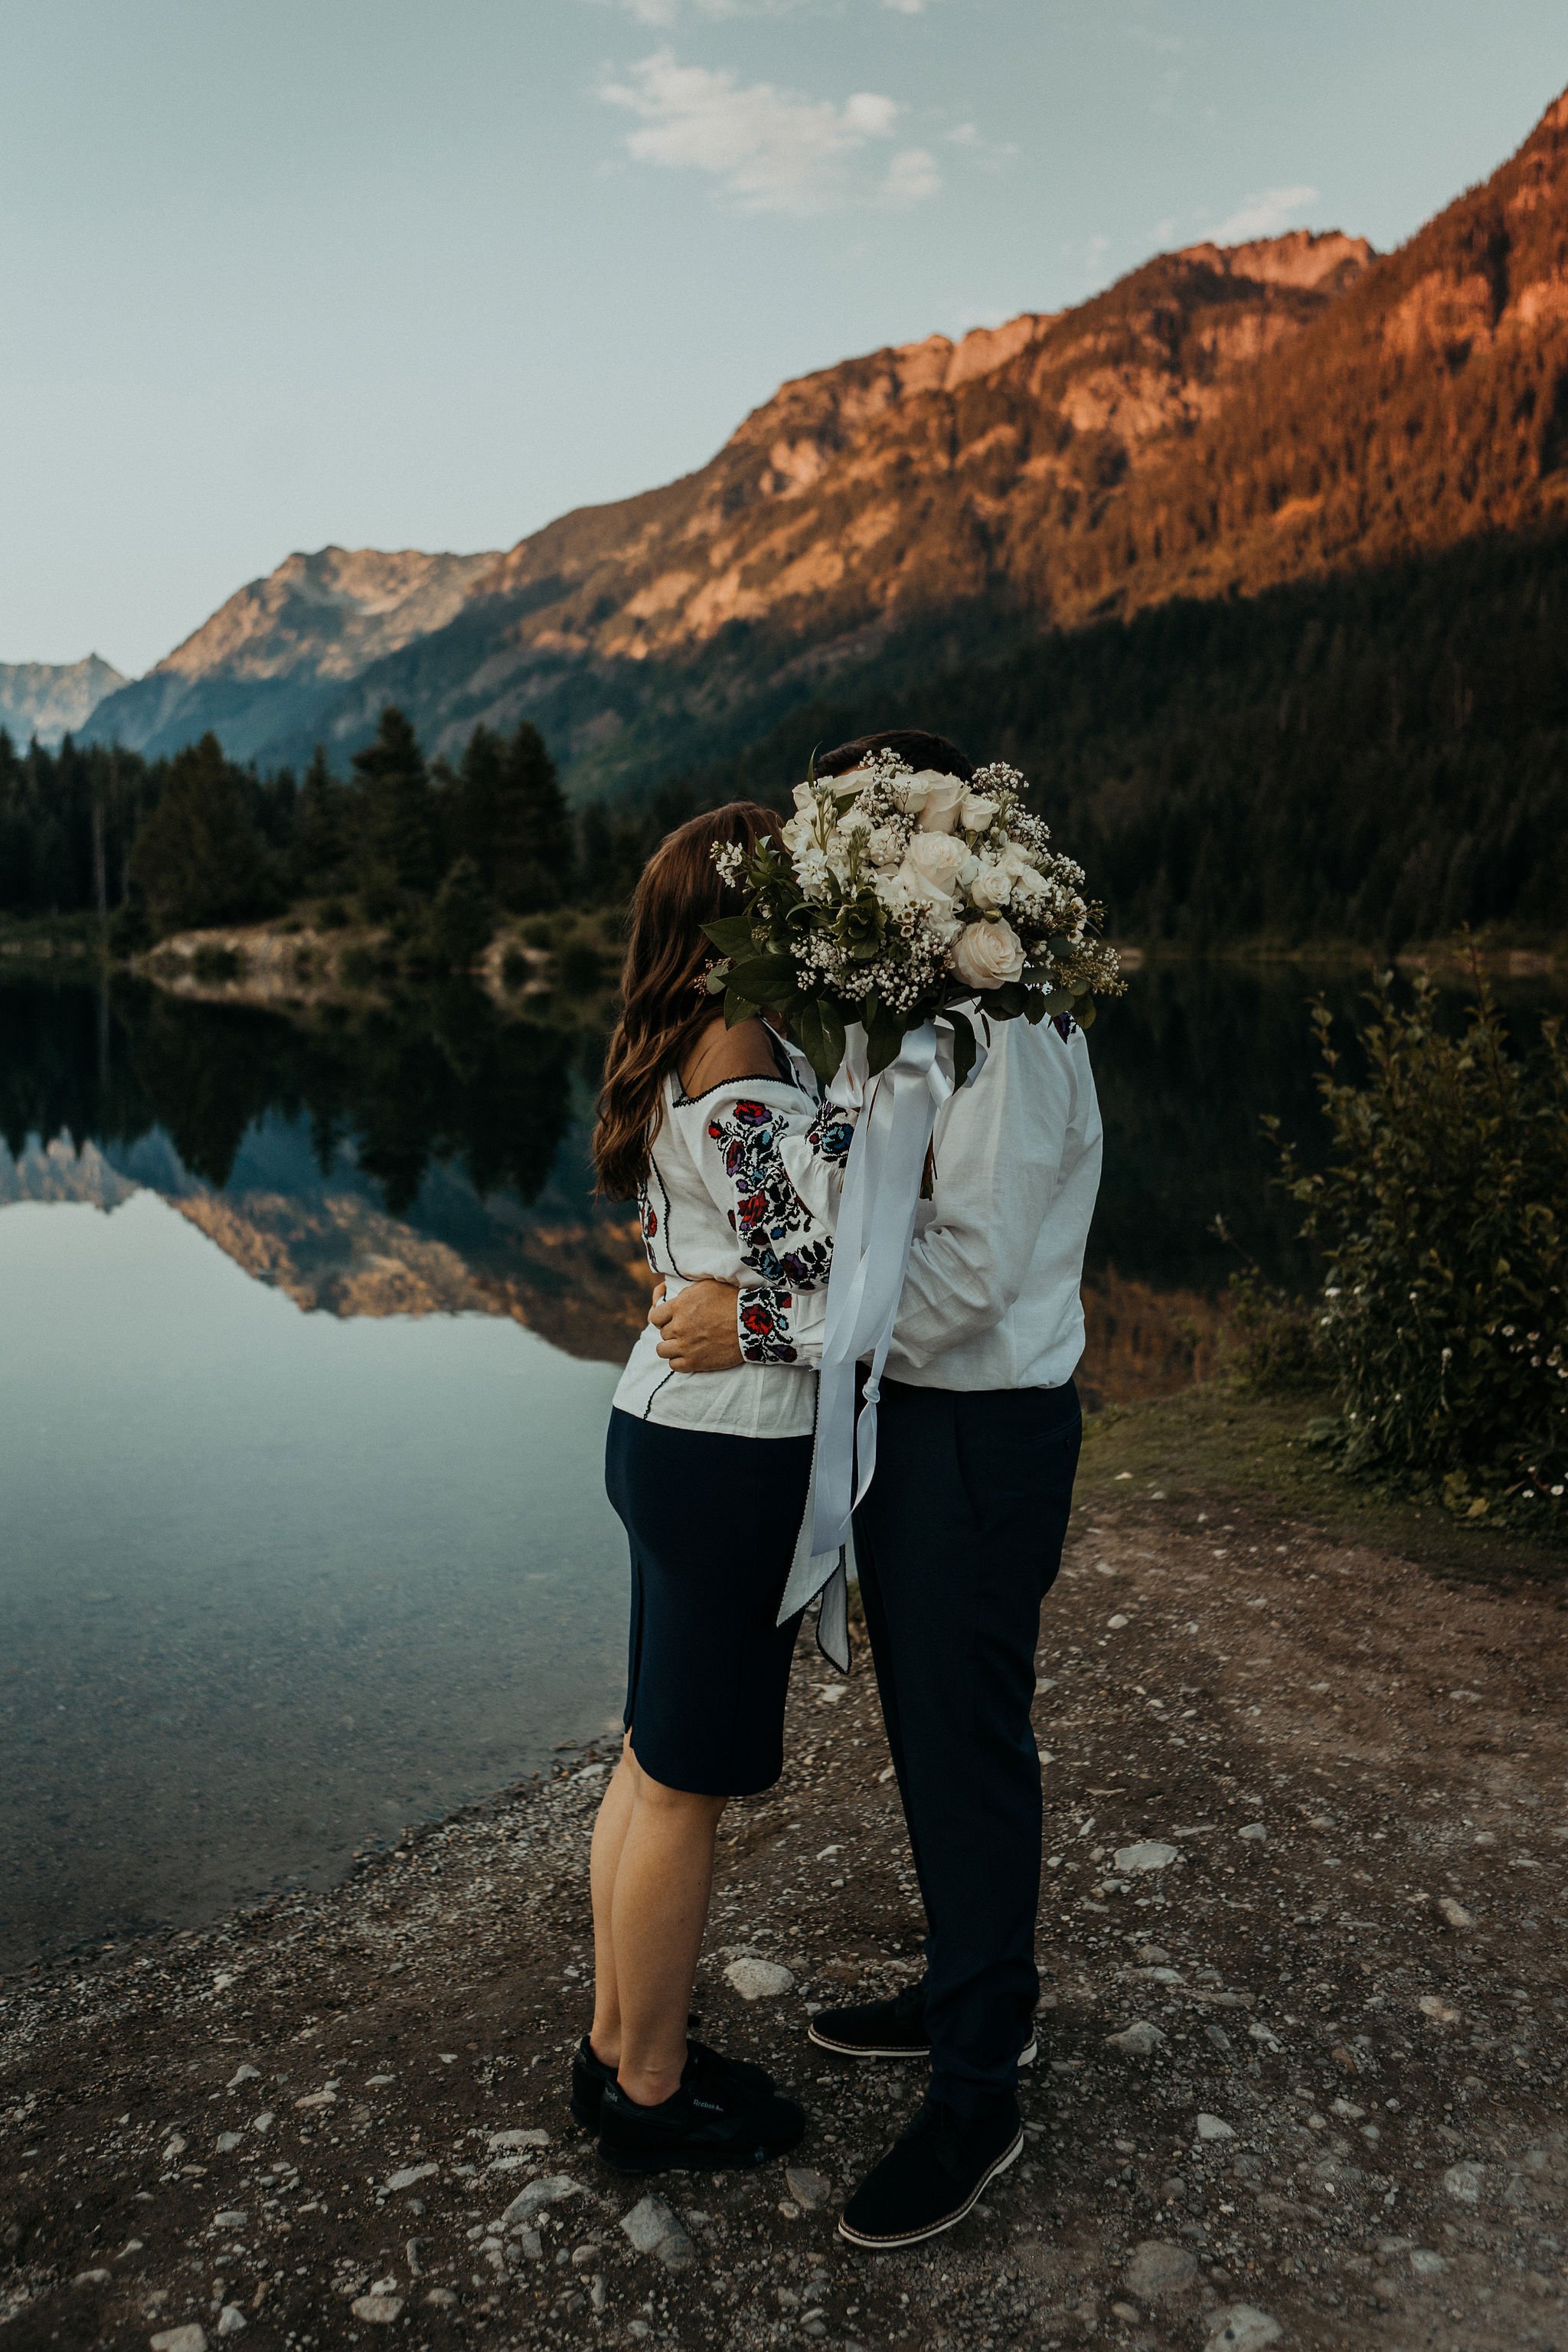 Kissing couple Elopement in Ukrainian style. Gold Creek Pond, general area Snoqualmie Pass, WA.jpg